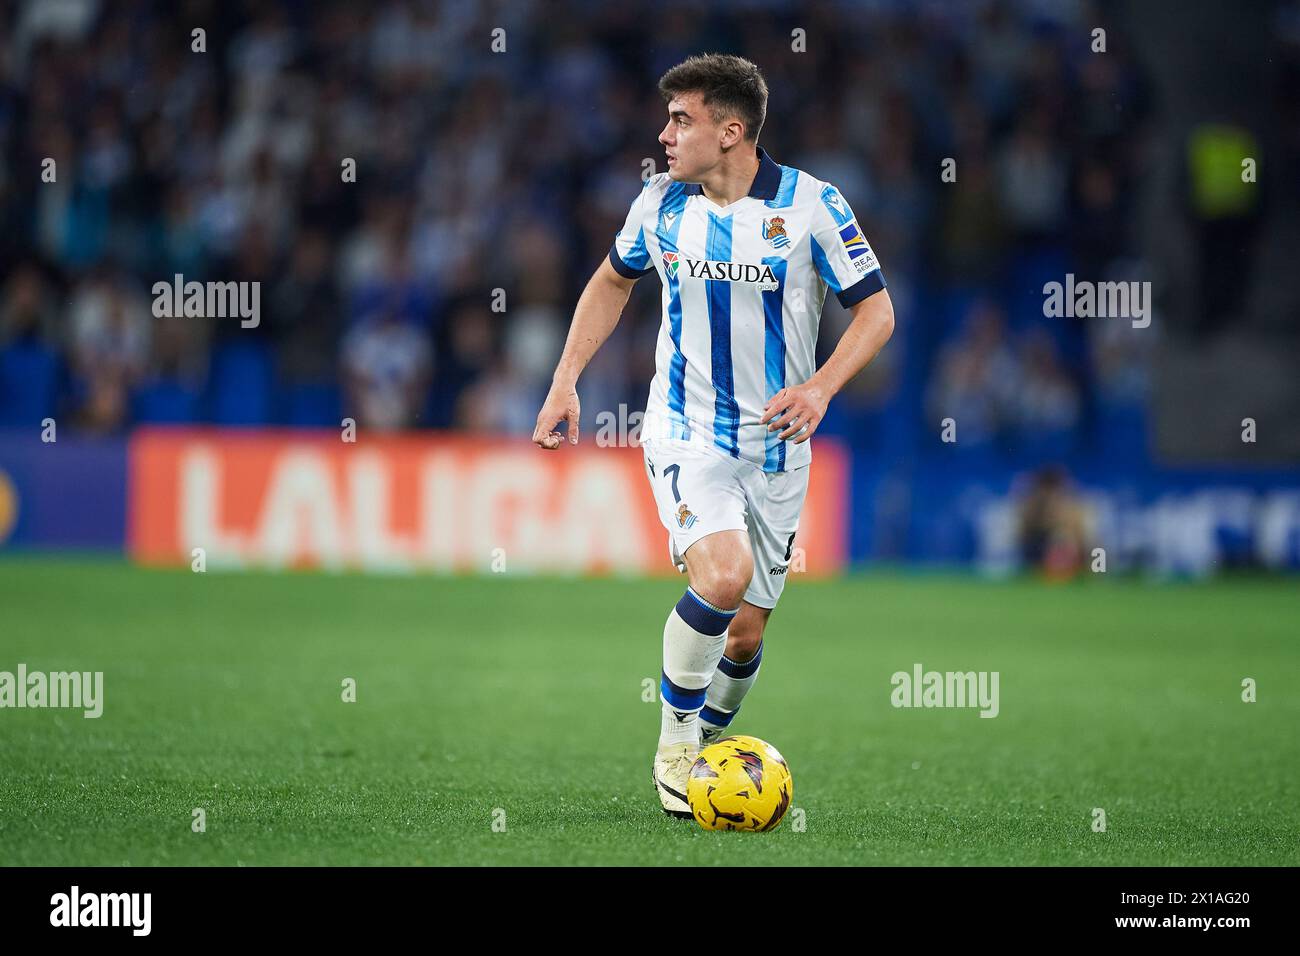 Ander Barrenetxea of Real Sociedad with the ball during the LaLiga EA Sports match between Real Sociedad and UD Almeria at Reale Arnea Stadium on Apri Stock Photo